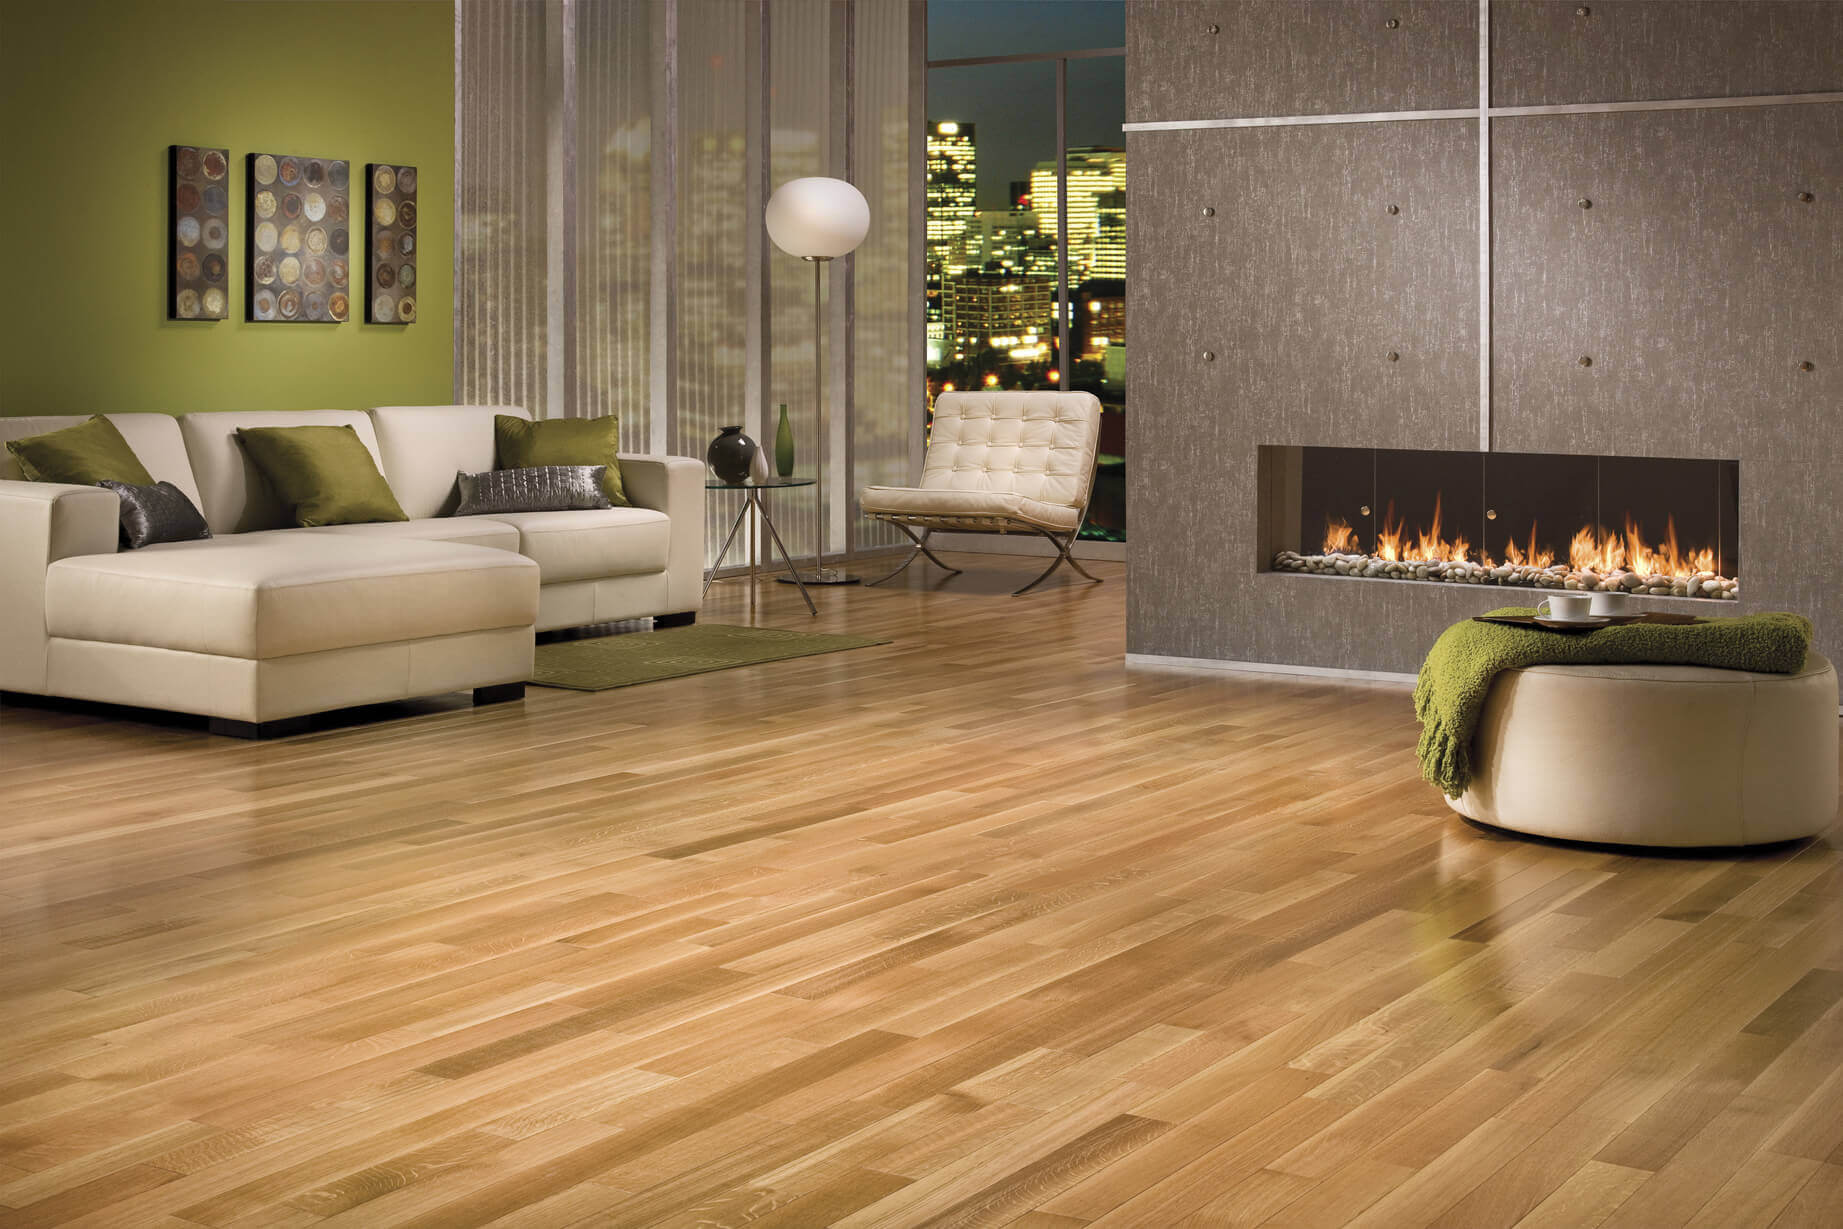 5 BEST Flooring Options: Material and Installation Costs ...
 Best Floor Tiles For Living Room